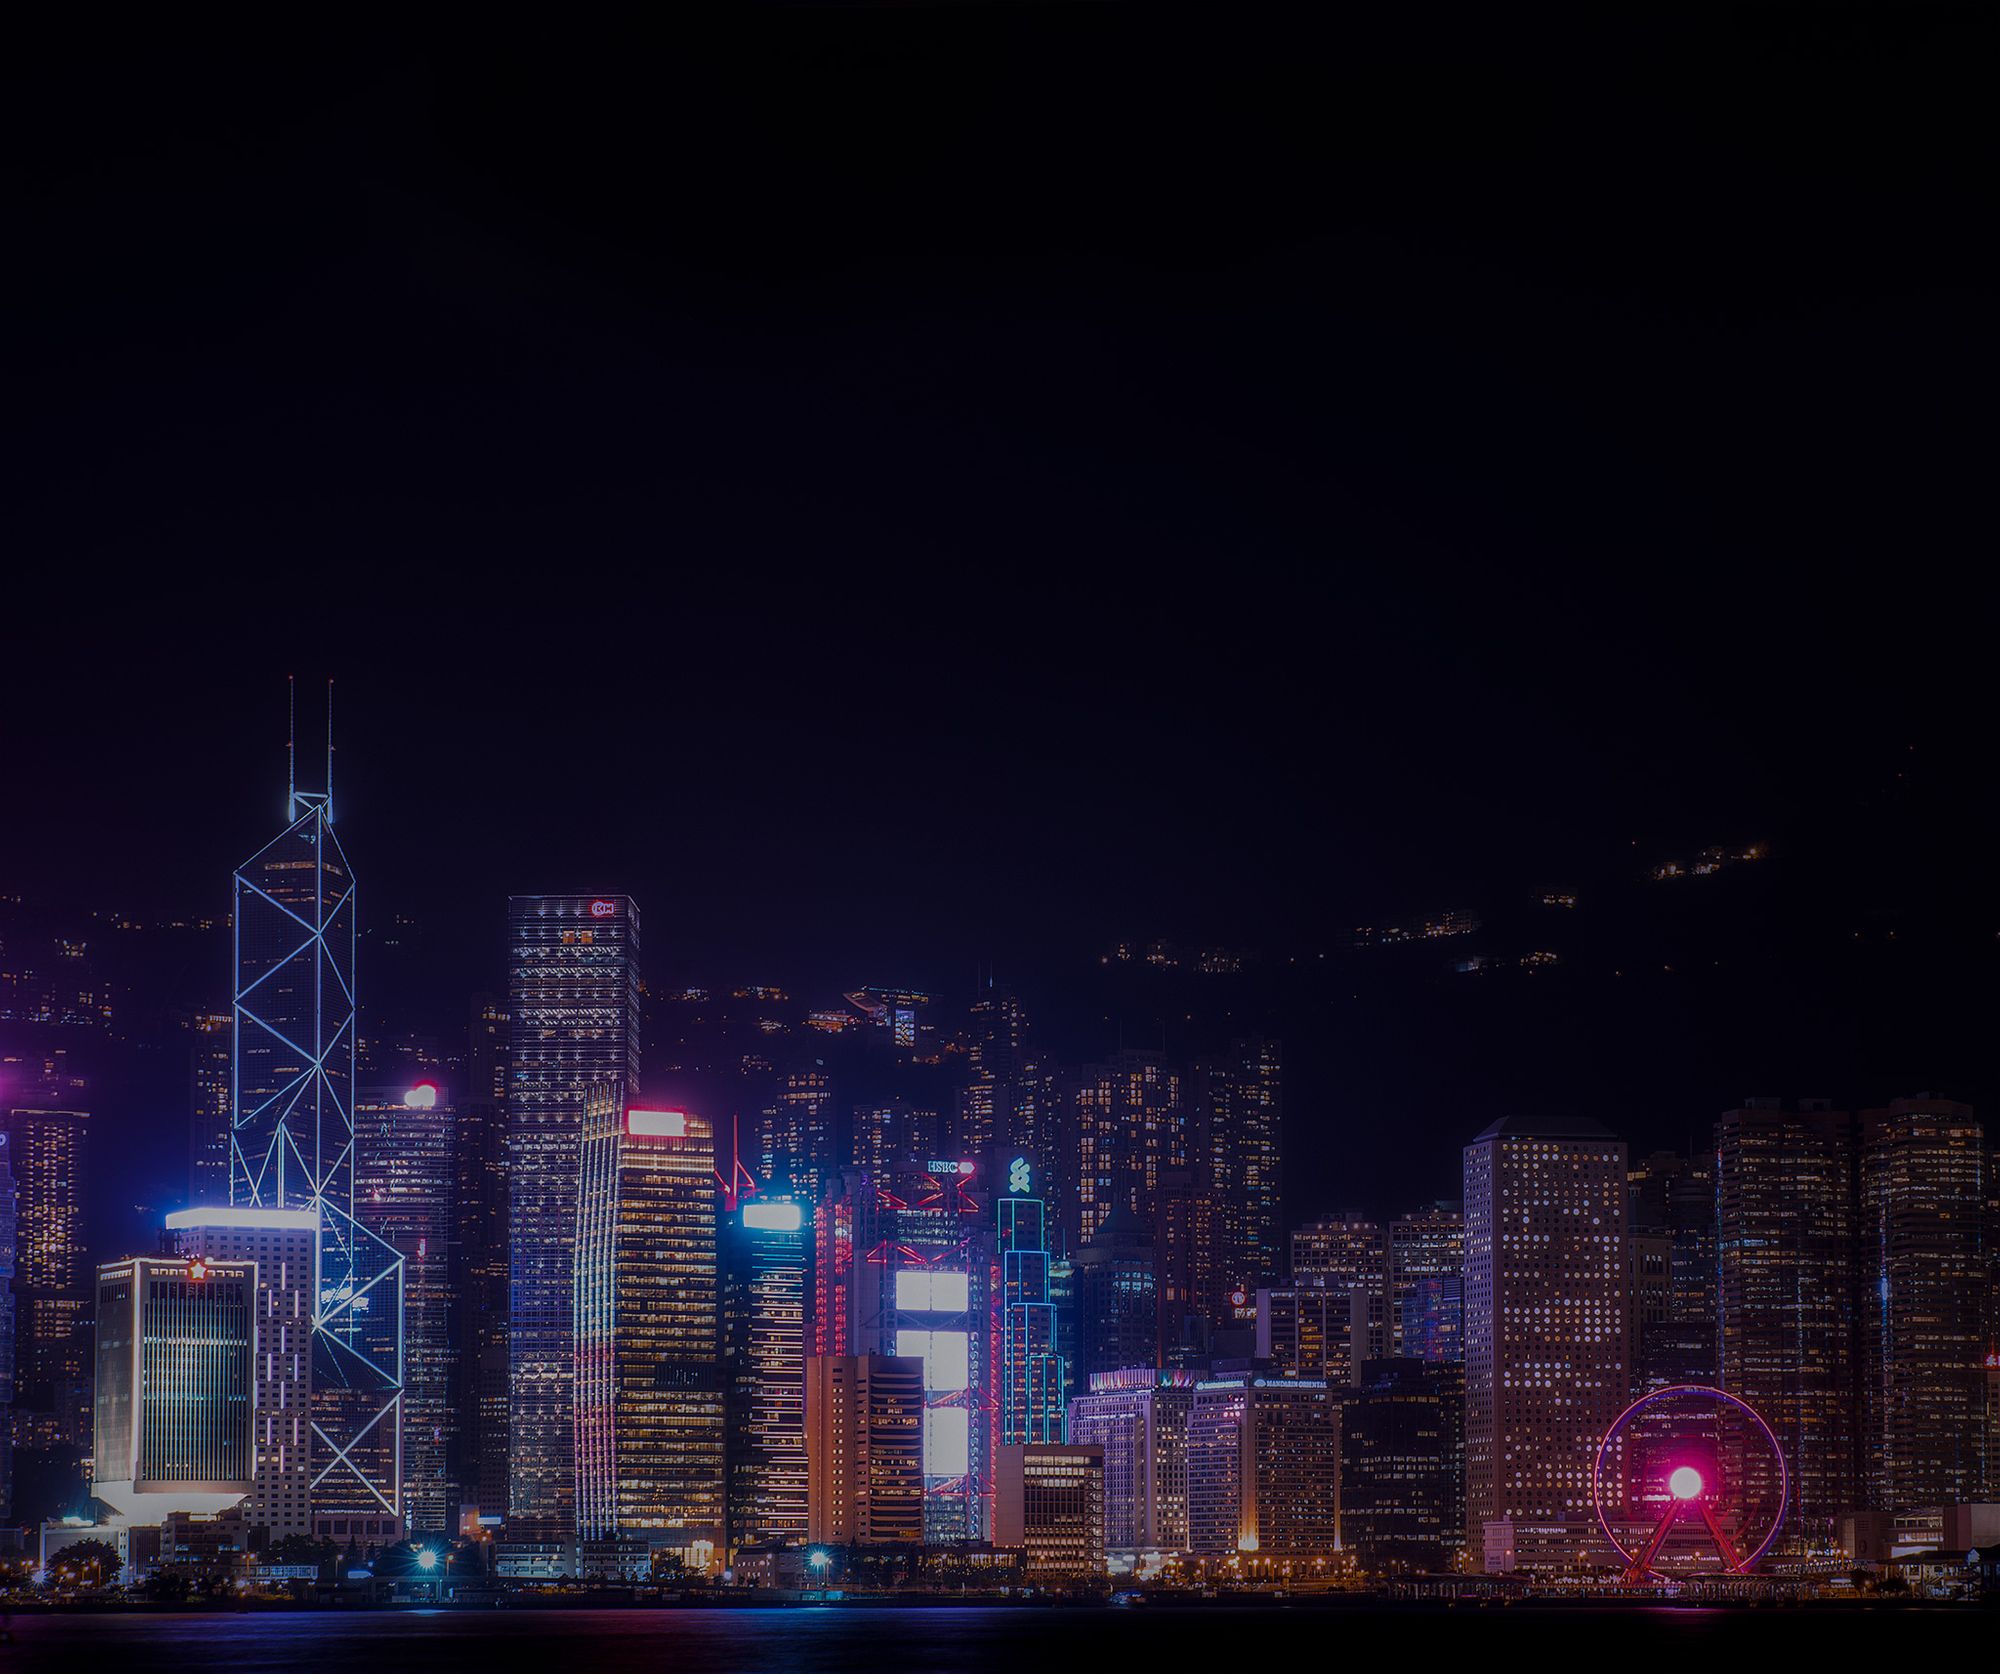 How I Applied Machine Learning to Real Life for Planning My Trip to Hong Kong